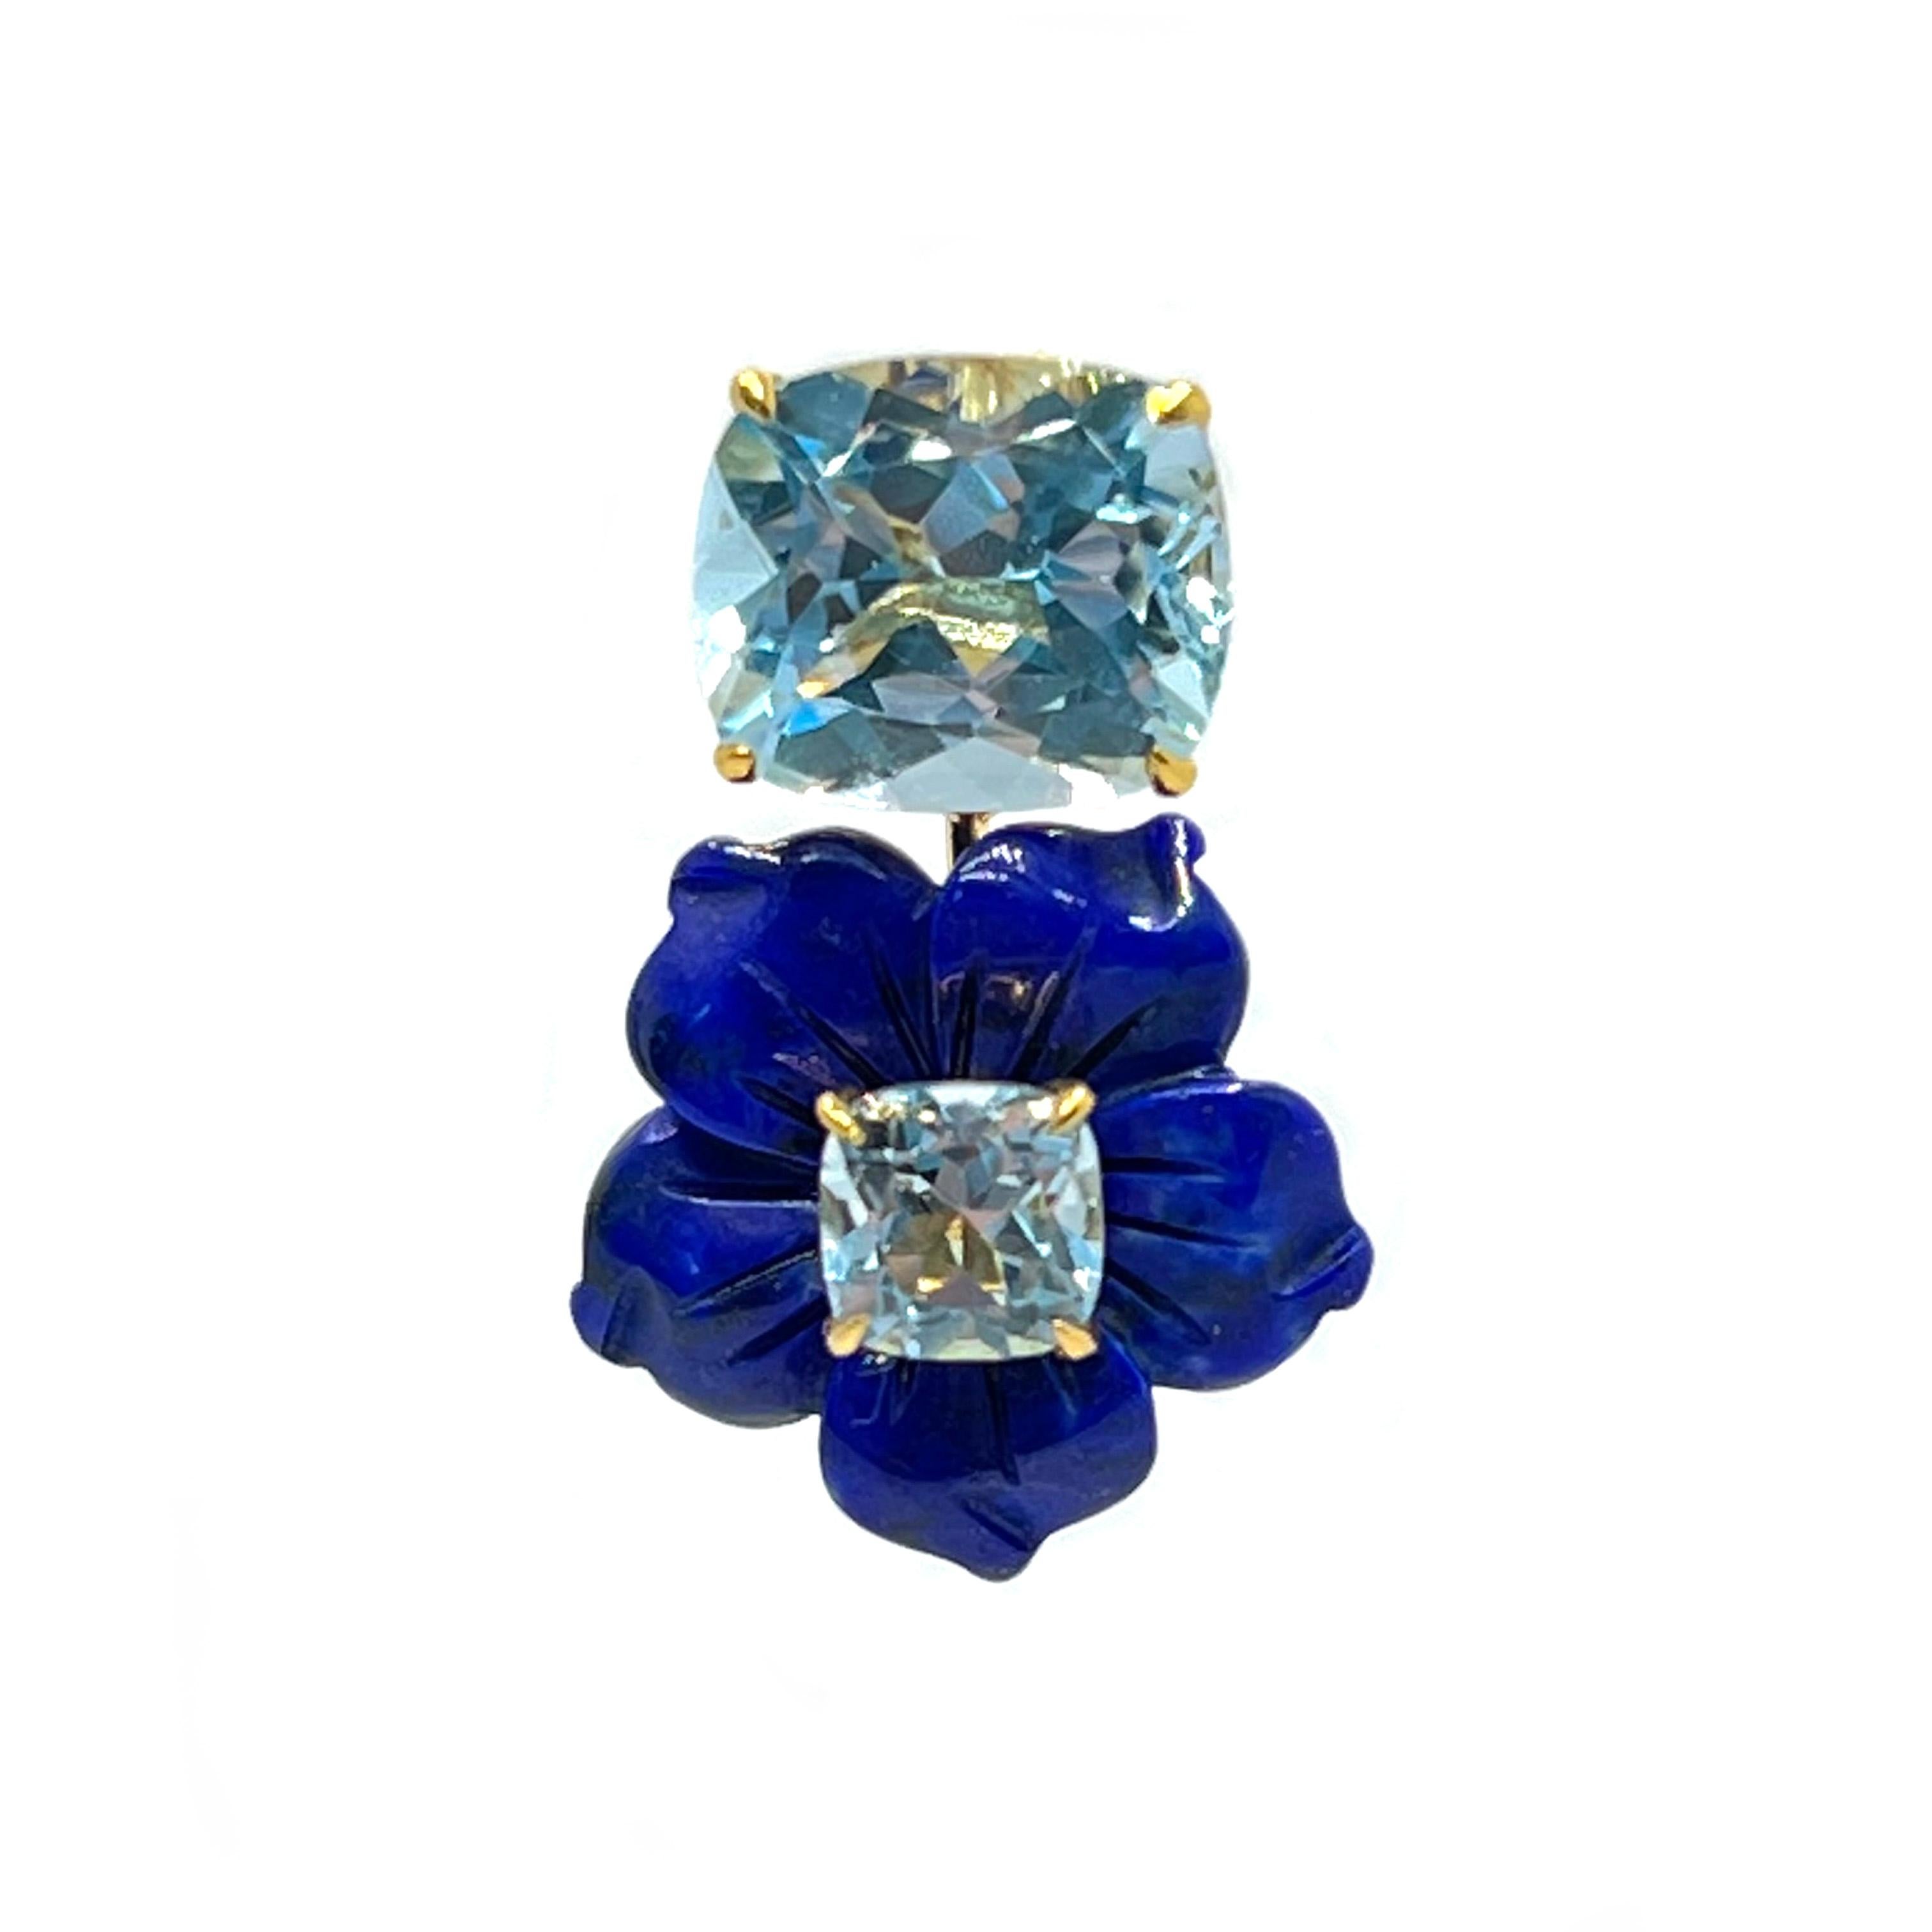 Mixed Cut Stunning Cushion-cut Blue Topaz and Carved Lapis Lazuli Flower Drop Earrings For Sale